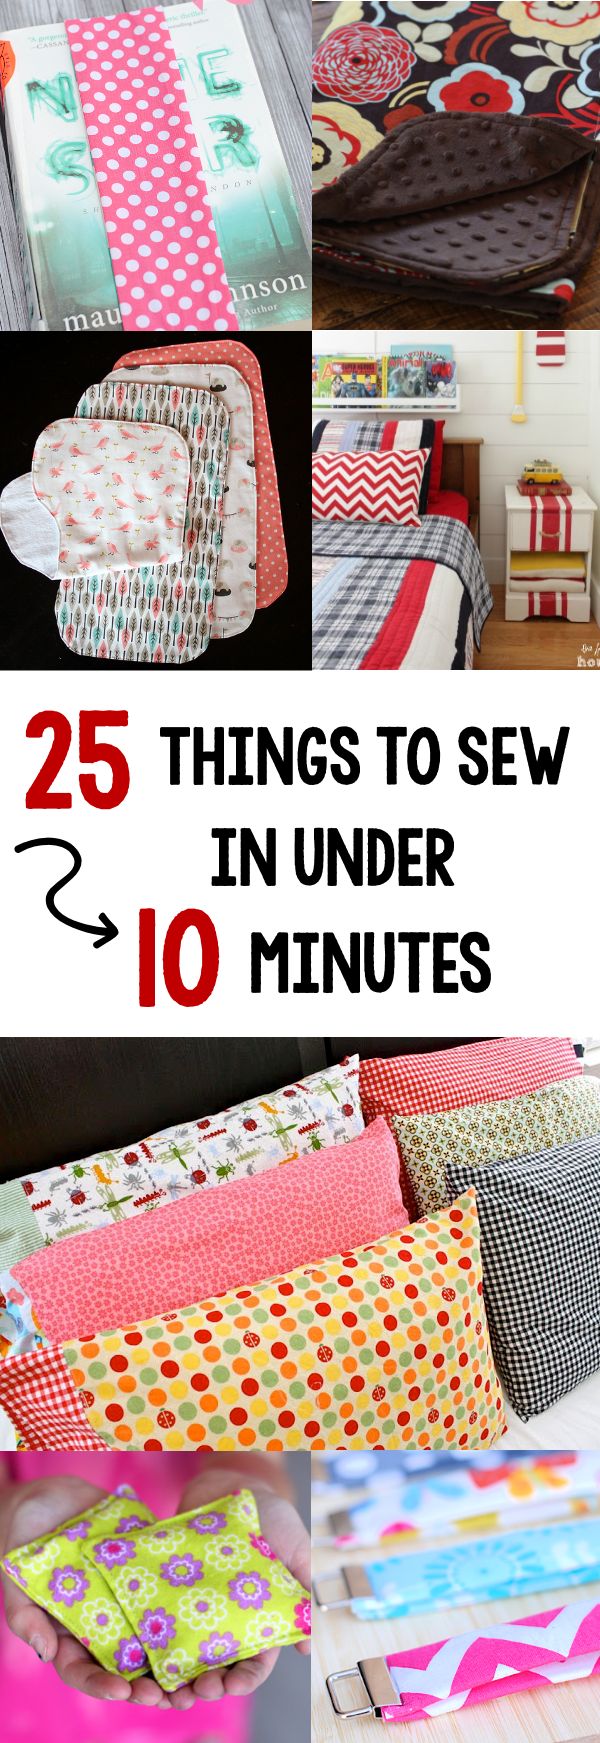 25 Quick and Easy Sewing Projects that You Can Complete in About 10 Minutes